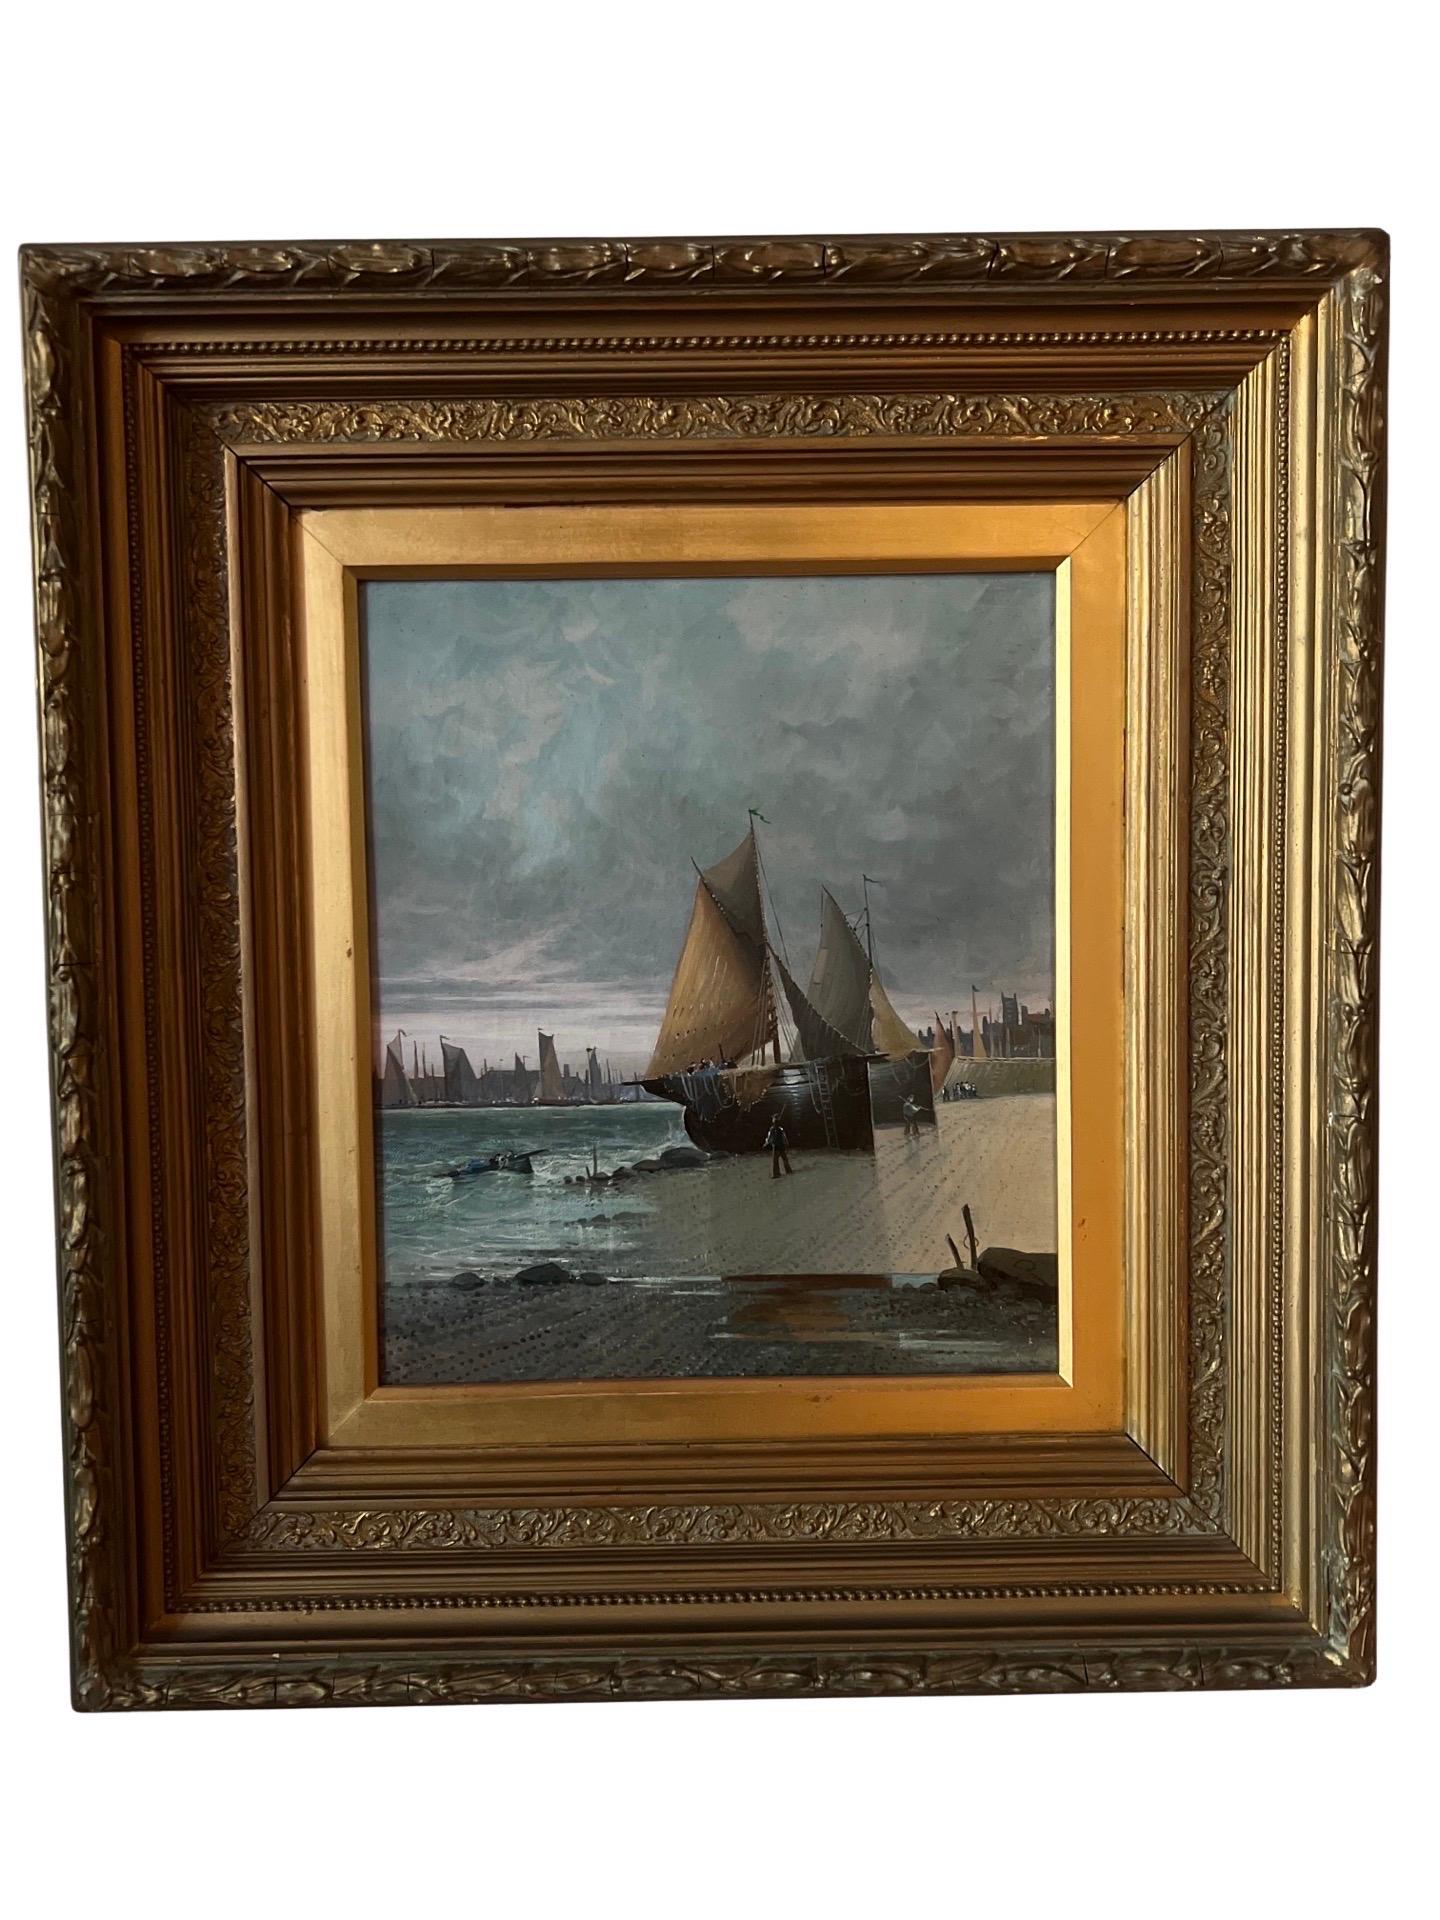 Dutch School, Early 20th century. 

A pair of nautical paintings on canvas depicting sailboats nestled on the beach during low tide. There is dozens of boats docked in the harbor behind. Done in opposing formats likely by a student of a talented